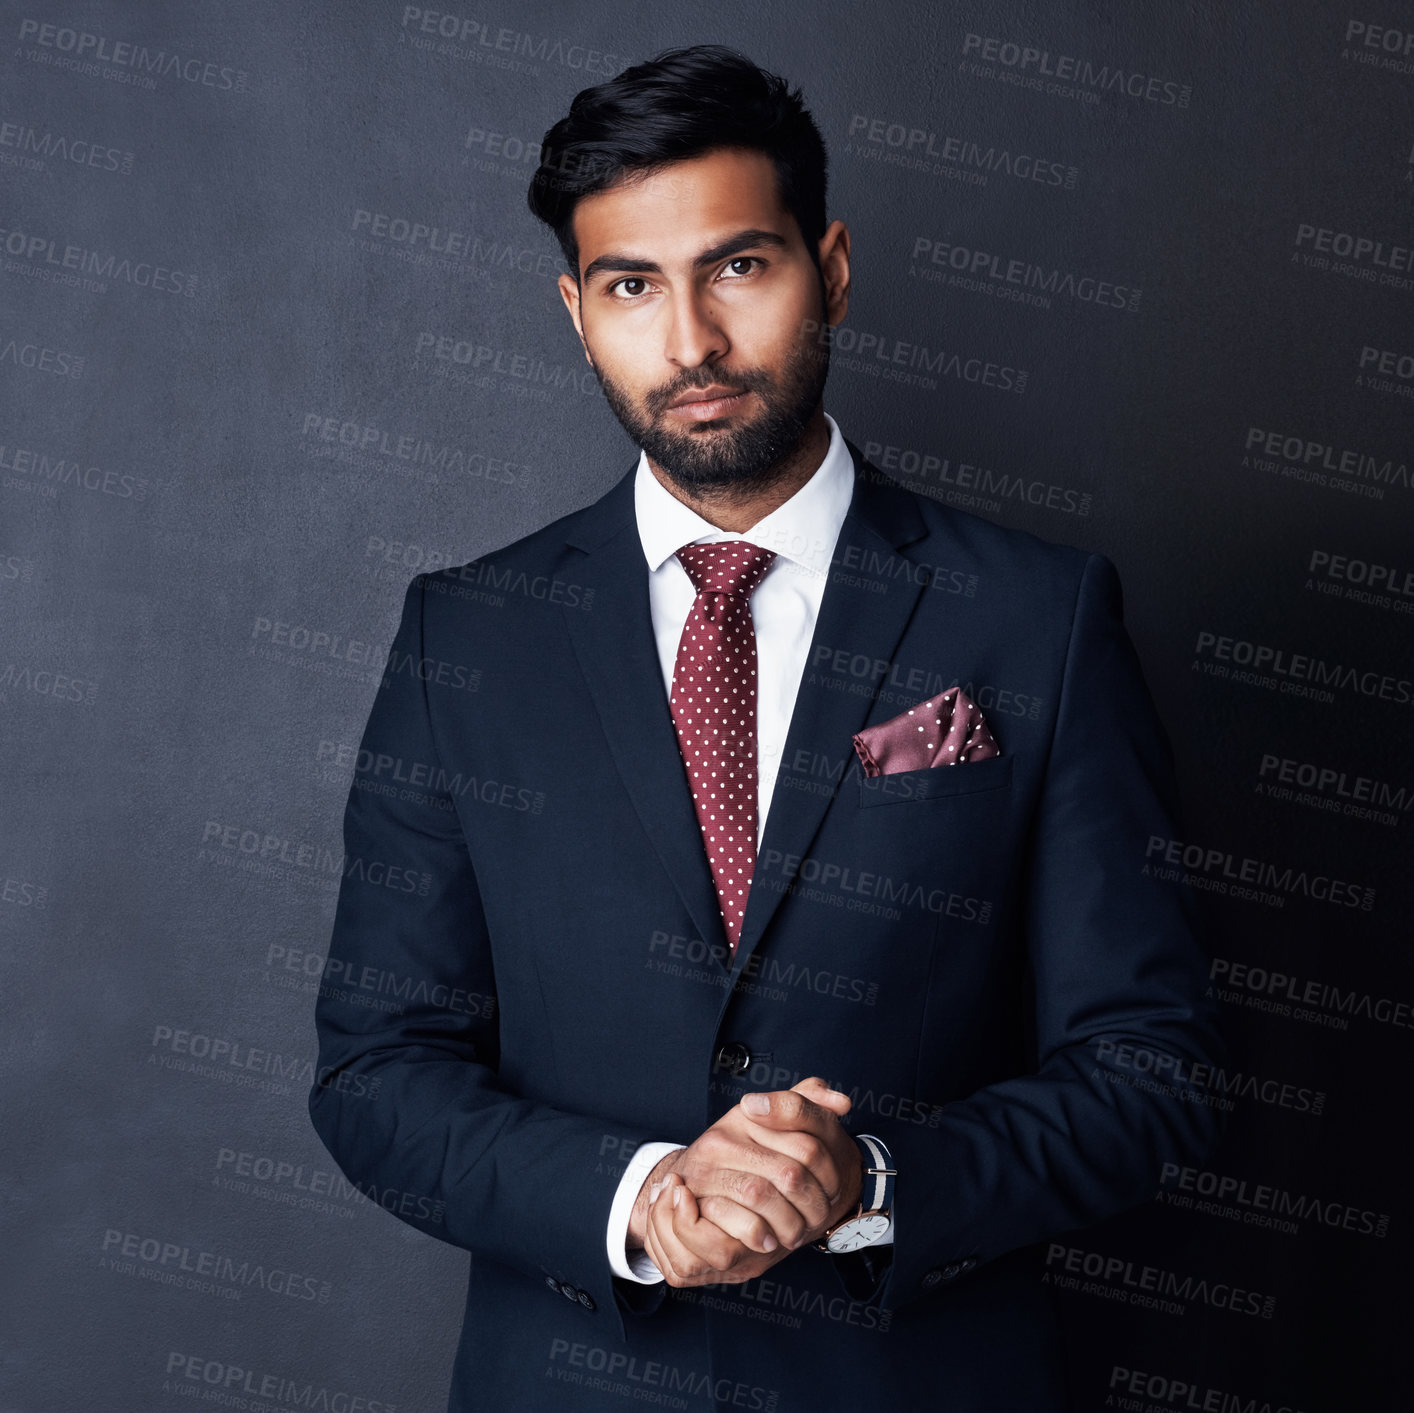 Buy stock photo Studio shot of a confident young businessman posing against a gray background